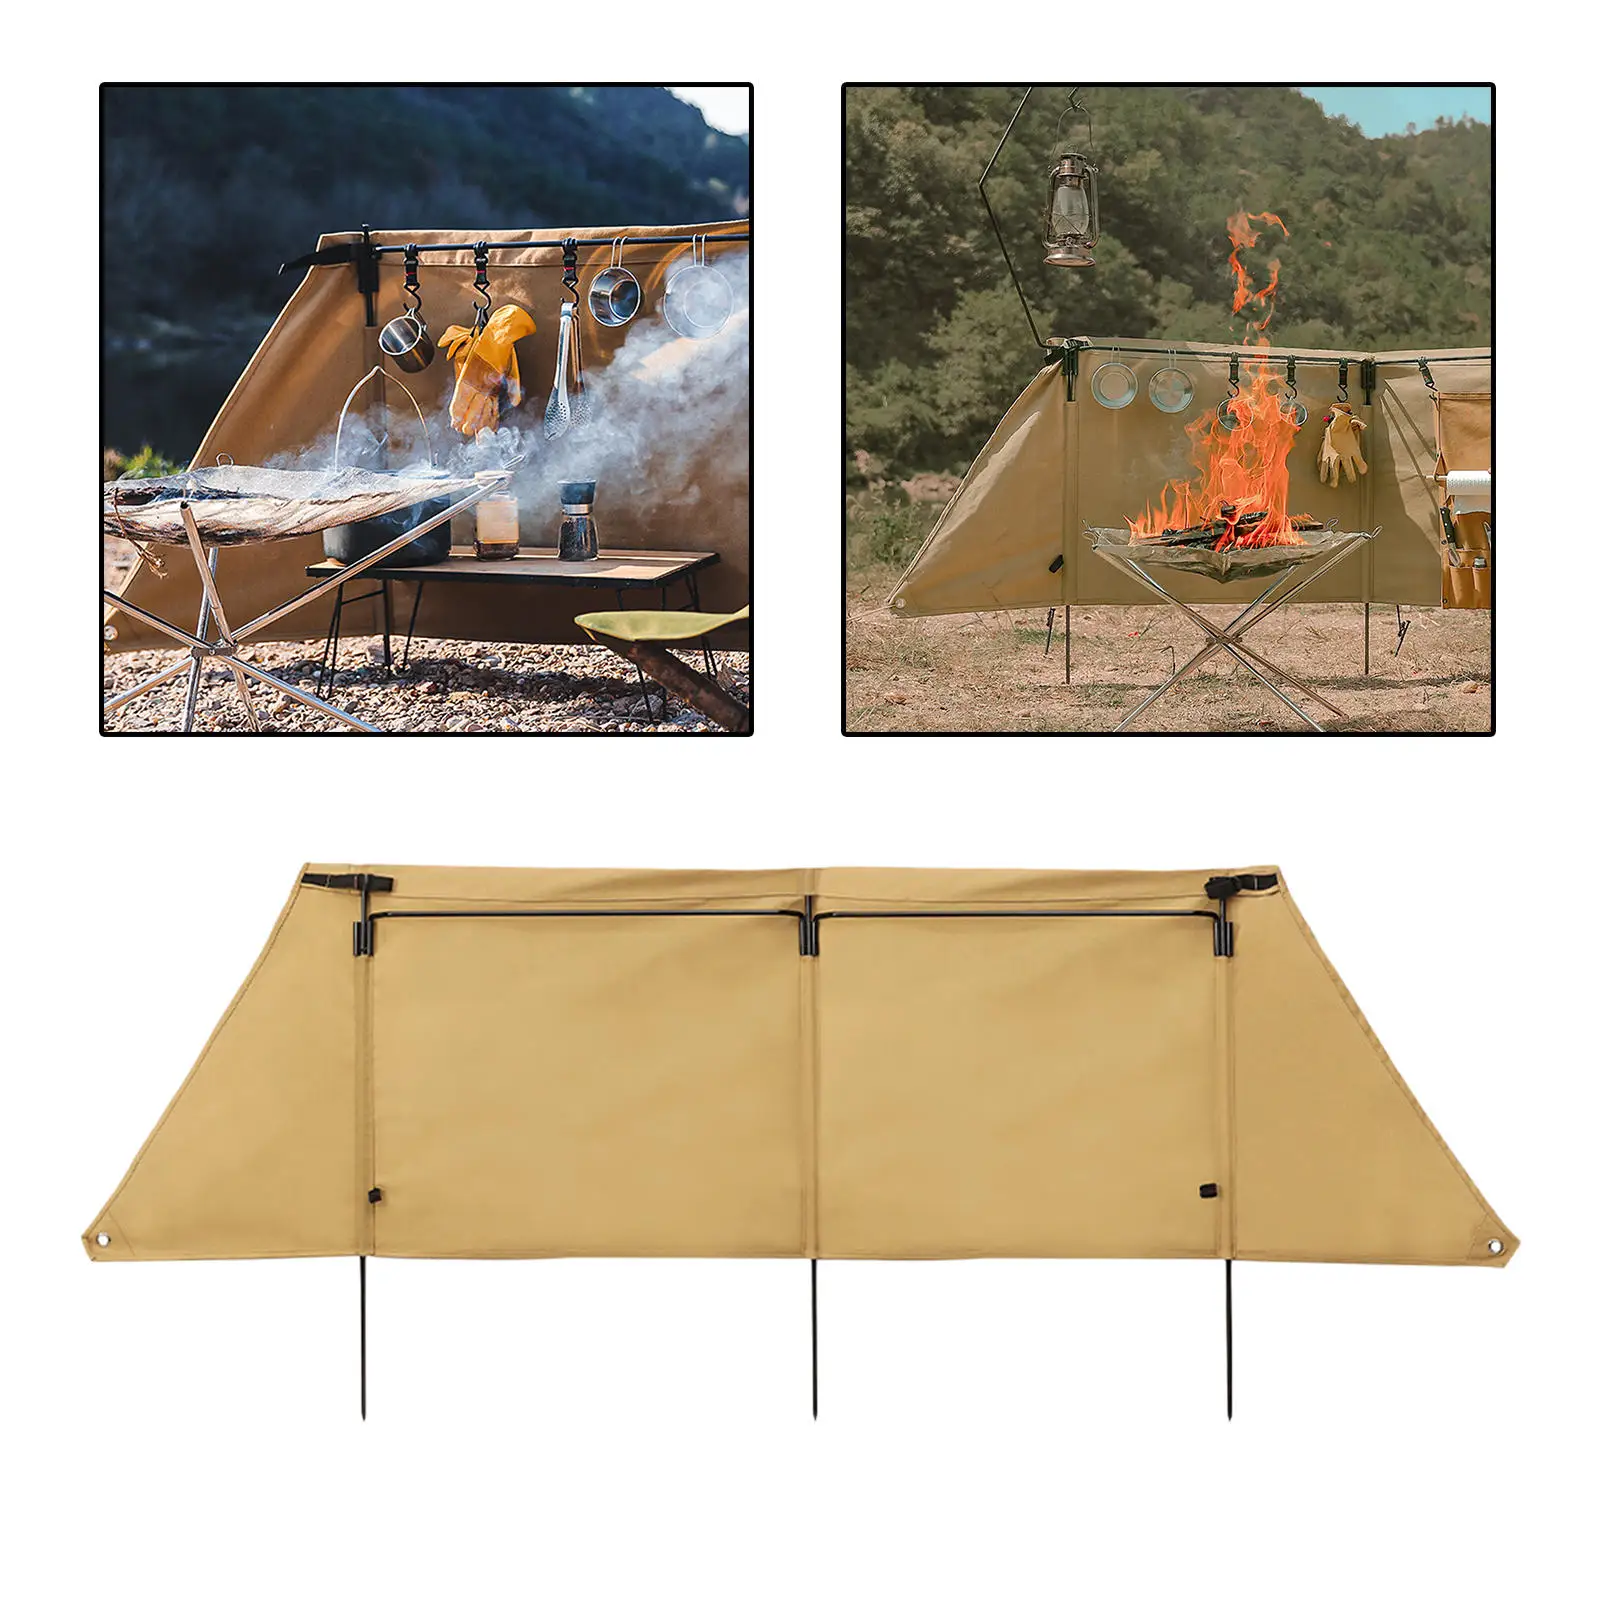 Outdoor Camping Wind Shield Stand Grills Gas Stove Canvas Windscreen Curtain Windshield for 3-4 People